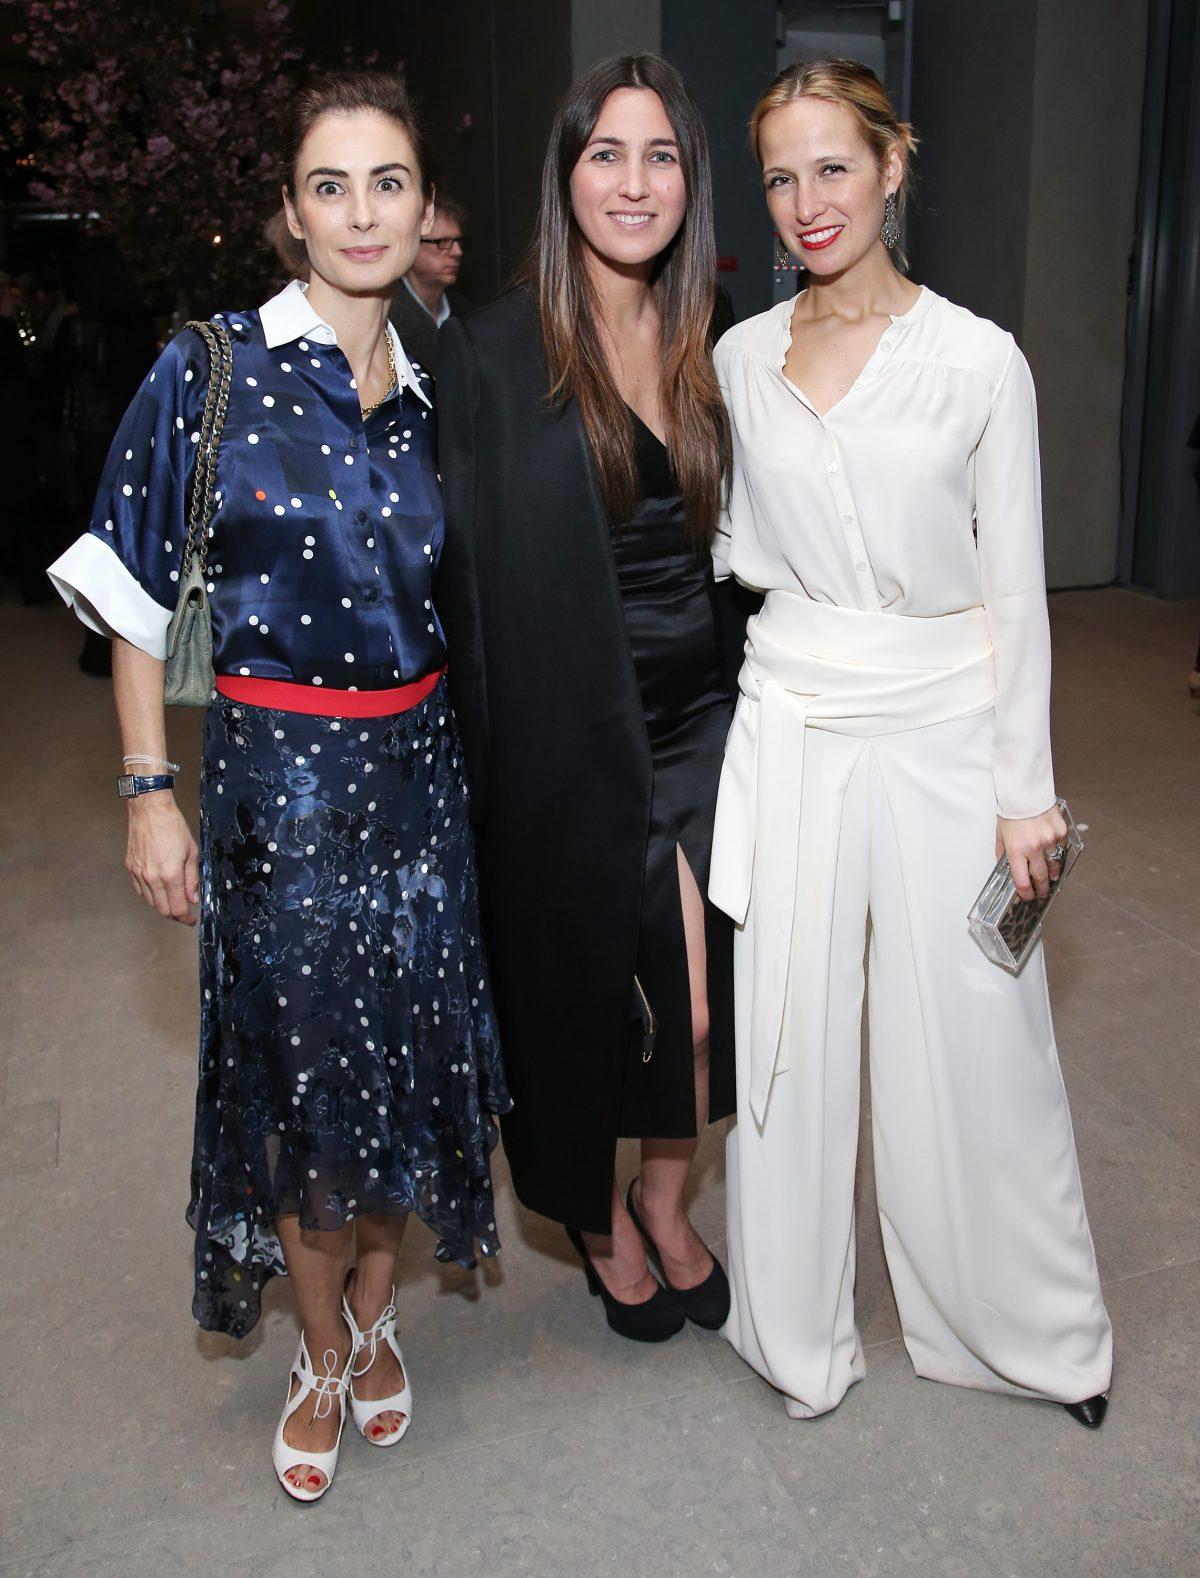 (L-R) Design director for Tiffany & Co. Francesca Amfitheatrof, Katherine Keating, and designer Misha Nonoo attend the opening of The Whitney Museum Of American Art at its new location in New York City on April 24, 2015. (Photo by Neilson Barnard/Getty Images for Max Mara)